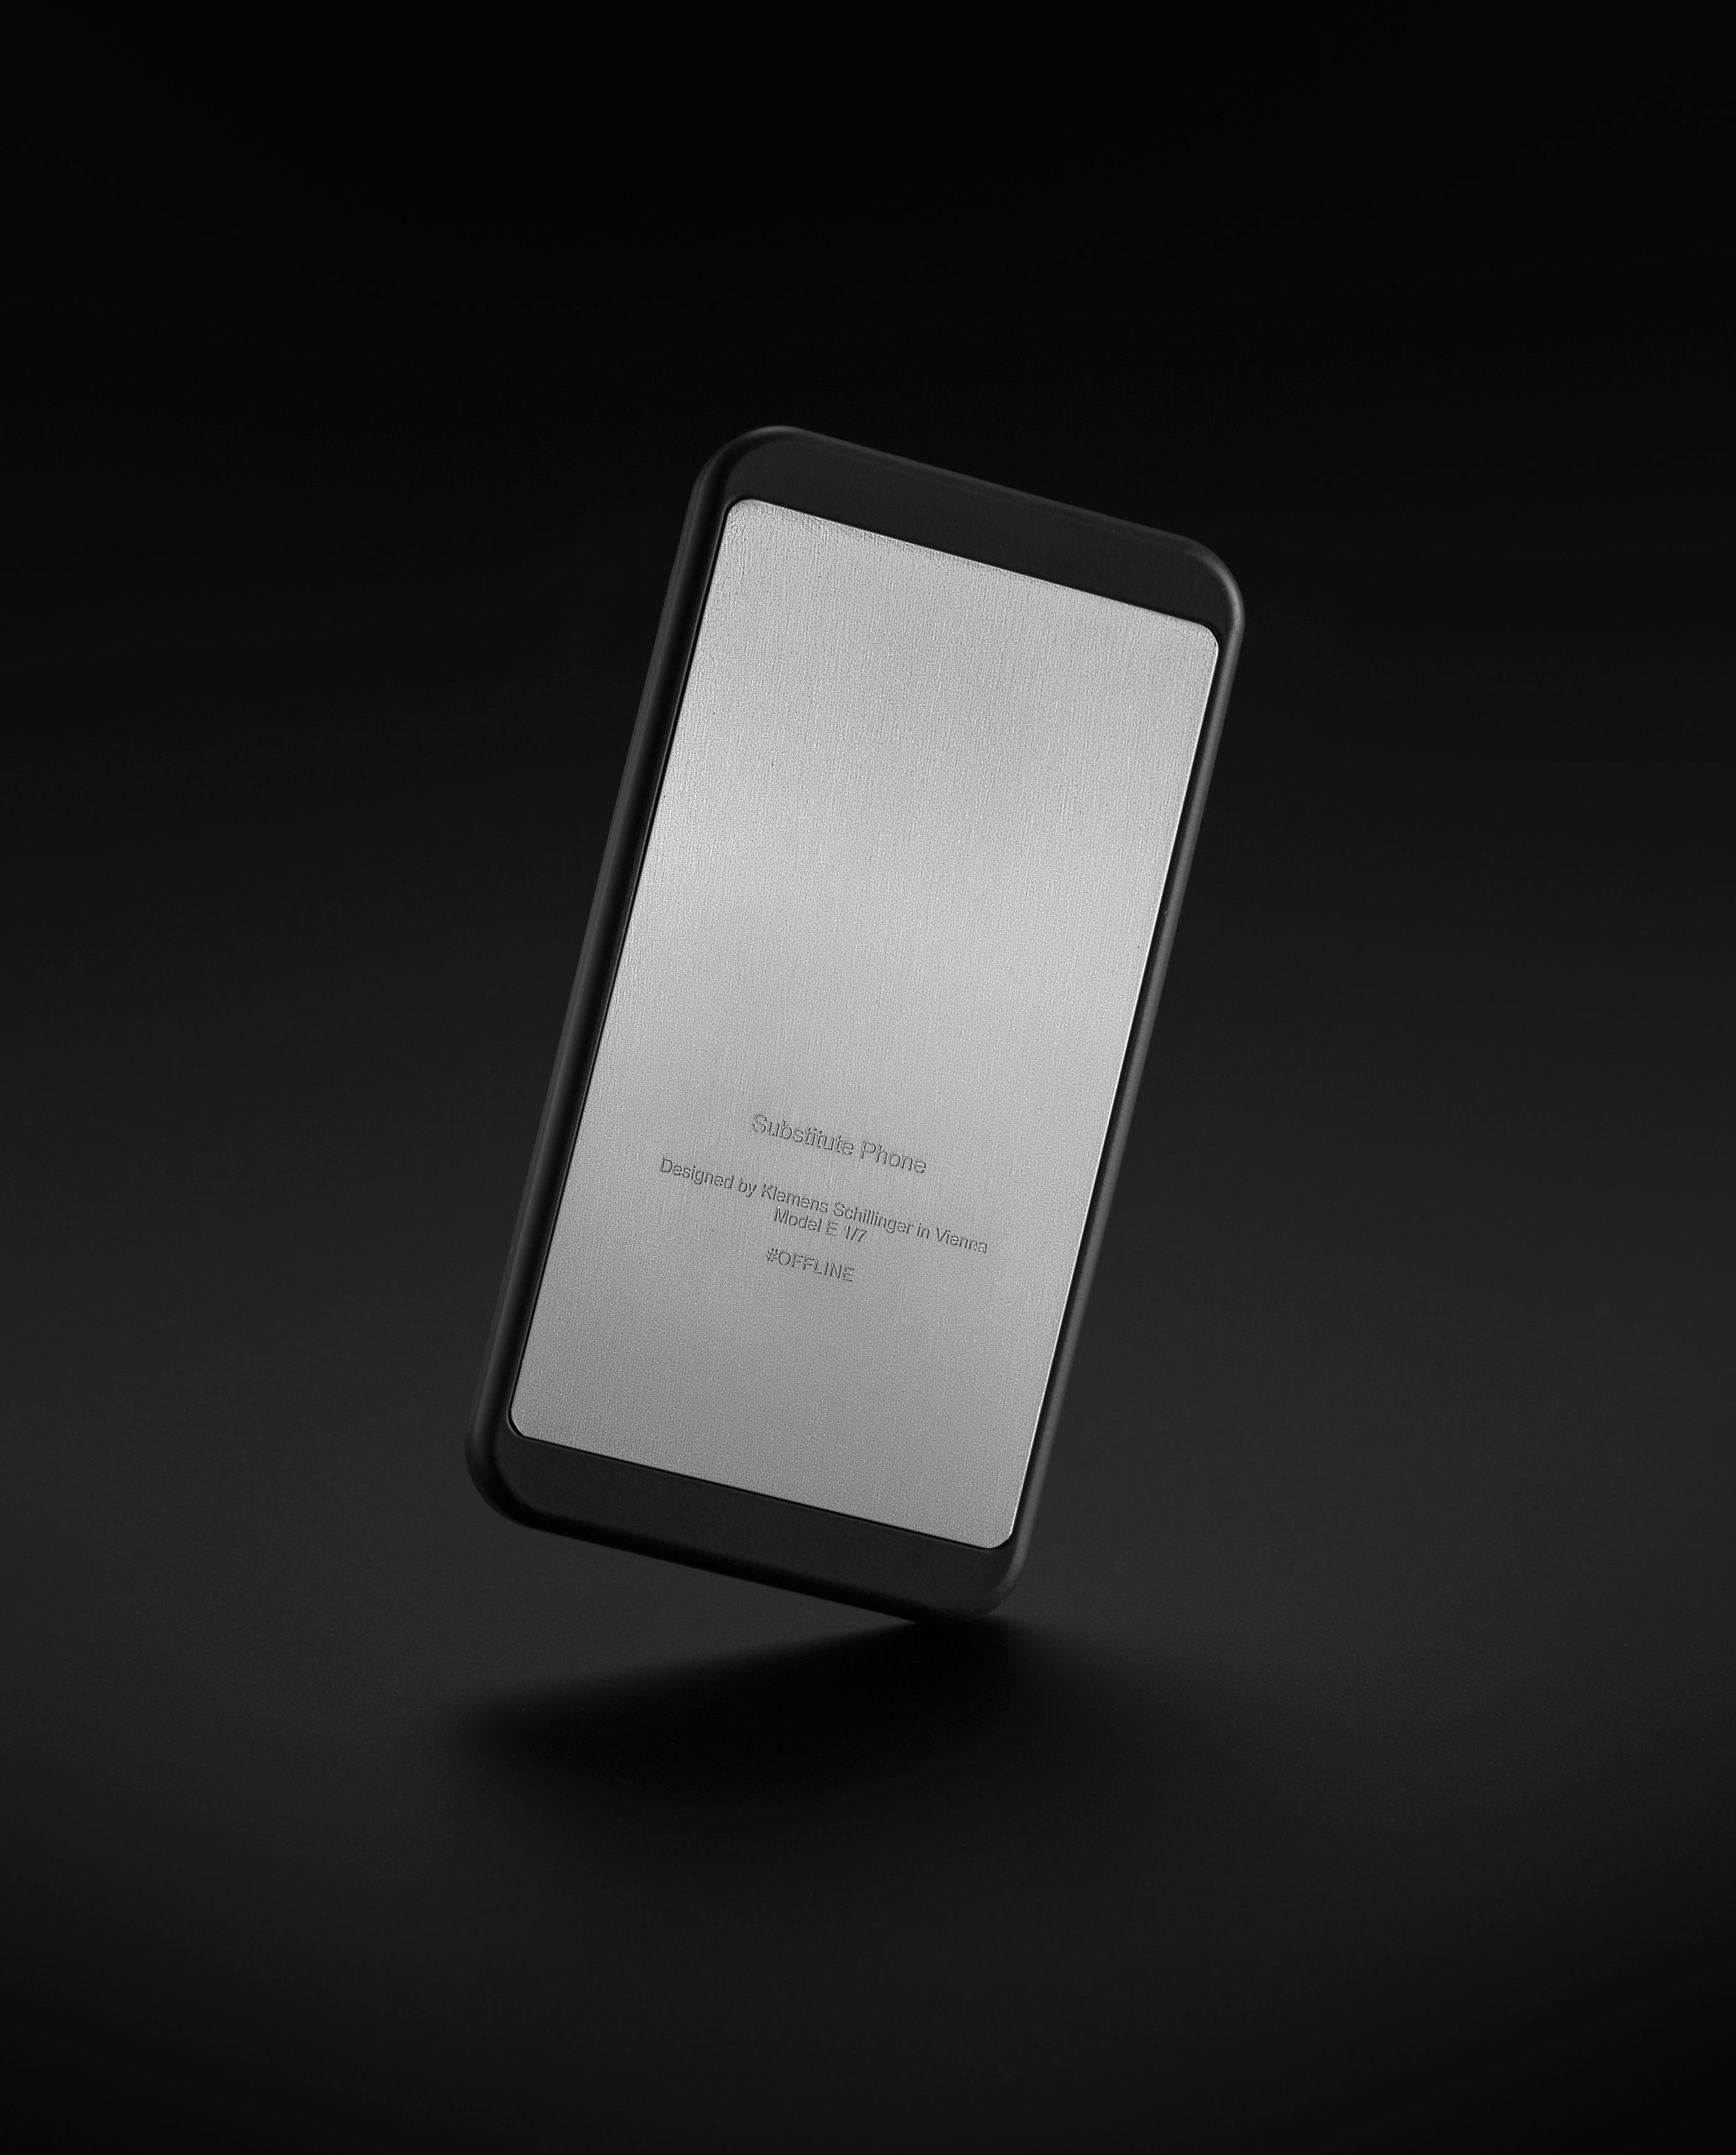 Klemens Schillinger’s Substitute Phone is designed to overcome smartphone addiction